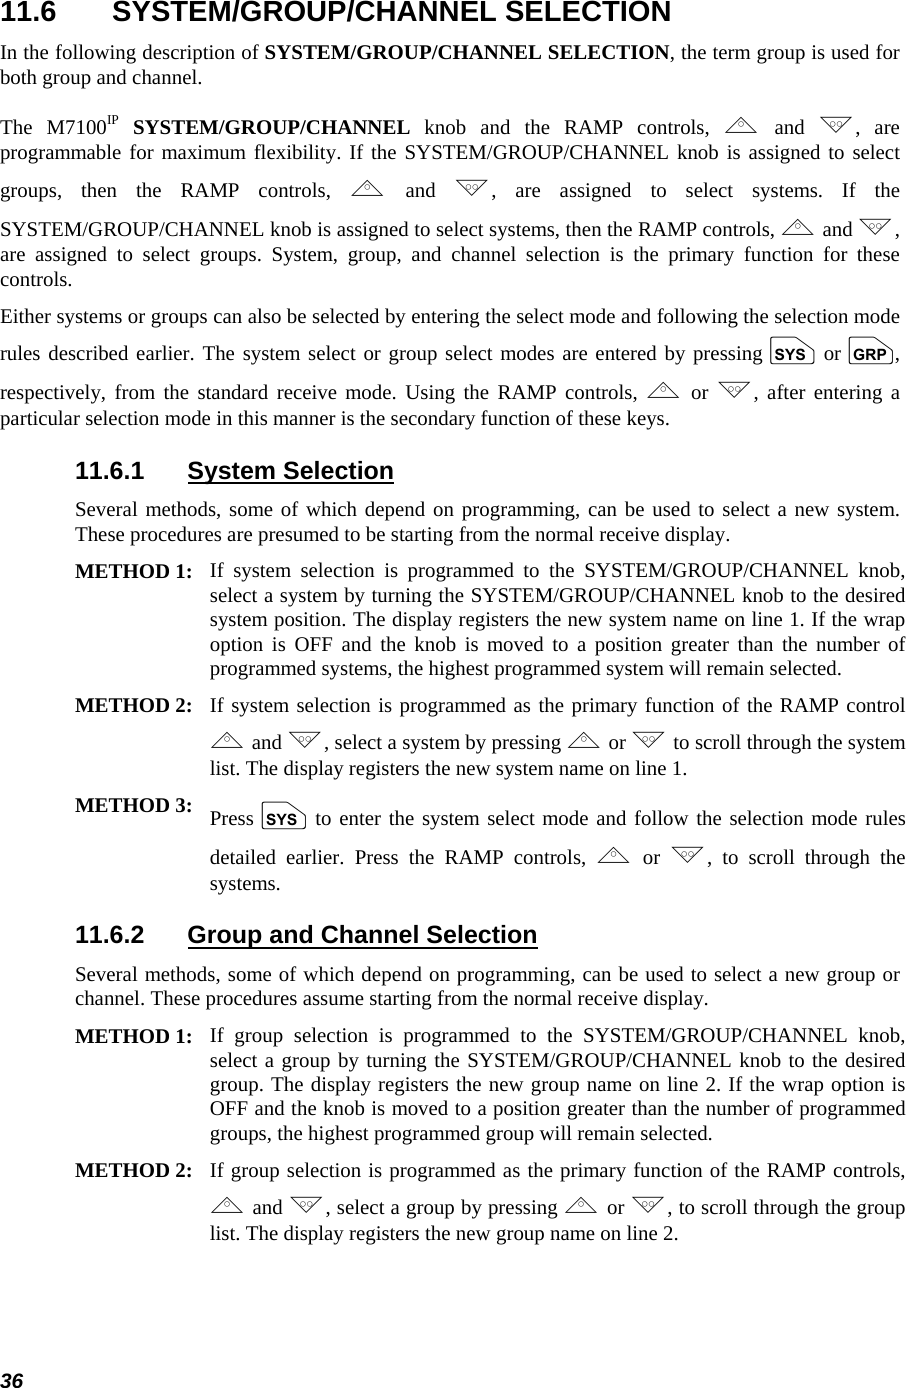  36 11.6 SYSTEM/GROUP/CHANNEL SELECTION In the following description of SYSTEM/GROUP/CHANNEL SELECTION, the term group is used for both group and channel. The M7100IP SYSTEM/GROUP/CHANNEL knob and the RAMP controls, , and ., are programmable for maximum flexibility. If the SYSTEM/GROUP/CHANNEL knob is assigned to select groups, then the RAMP controls, , and ., are assigned to select systems. If the SYSTEM/GROUP/CHANNEL knob is assigned to select systems, then the RAMP controls, , and ., are assigned to select groups. System, group, and channel selection is the primary function for these controls. Either systems or groups can also be selected by entering the select mode and following the selection mode rules described earlier. The system select or group select modes are entered by pressing S or g, respectively, from the standard receive mode. Using the RAMP controls, , or ., after entering a particular selection mode in this manner is the secondary function of these keys. 11.6.1 System Selection Several methods, some of which depend on programming, can be used to select a new system. These procedures are presumed to be starting from the normal receive display.  METHOD 1: If system selection is programmed to the SYSTEM/GROUP/CHANNEL knob, select a system by turning the SYSTEM/GROUP/CHANNEL knob to the desired system position. The display registers the new system name on line 1. If the wrap option is OFF and the knob is moved to a position greater than the number of programmed systems, the highest programmed system will remain selected.  METHOD 2: If system selection is programmed as the primary function of the RAMP control , and ., select a system by pressing , or .to scroll through the system list. The display registers the new system name on line 1.  METHOD 3: Press S to enter the system select mode and follow the selection mode rules detailed earlier. Press the RAMP controls, , or ., to scroll through the systems.  11.6.2  Group and Channel Selection Several methods, some of which depend on programming, can be used to select a new group or channel. These procedures assume starting from the normal receive display. METHOD 1: If group selection is programmed to the SYSTEM/GROUP/CHANNEL knob, select a group by turning the SYSTEM/GROUP/CHANNEL knob to the desired group. The display registers the new group name on line 2. If the wrap option is OFF and the knob is moved to a position greater than the number of programmed groups, the highest programmed group will remain selected.  METHOD 2: If group selection is programmed as the primary function of the RAMP controls, , and ., select a group by pressing , or ., to scroll through the group list. The display registers the new group name on line 2. 